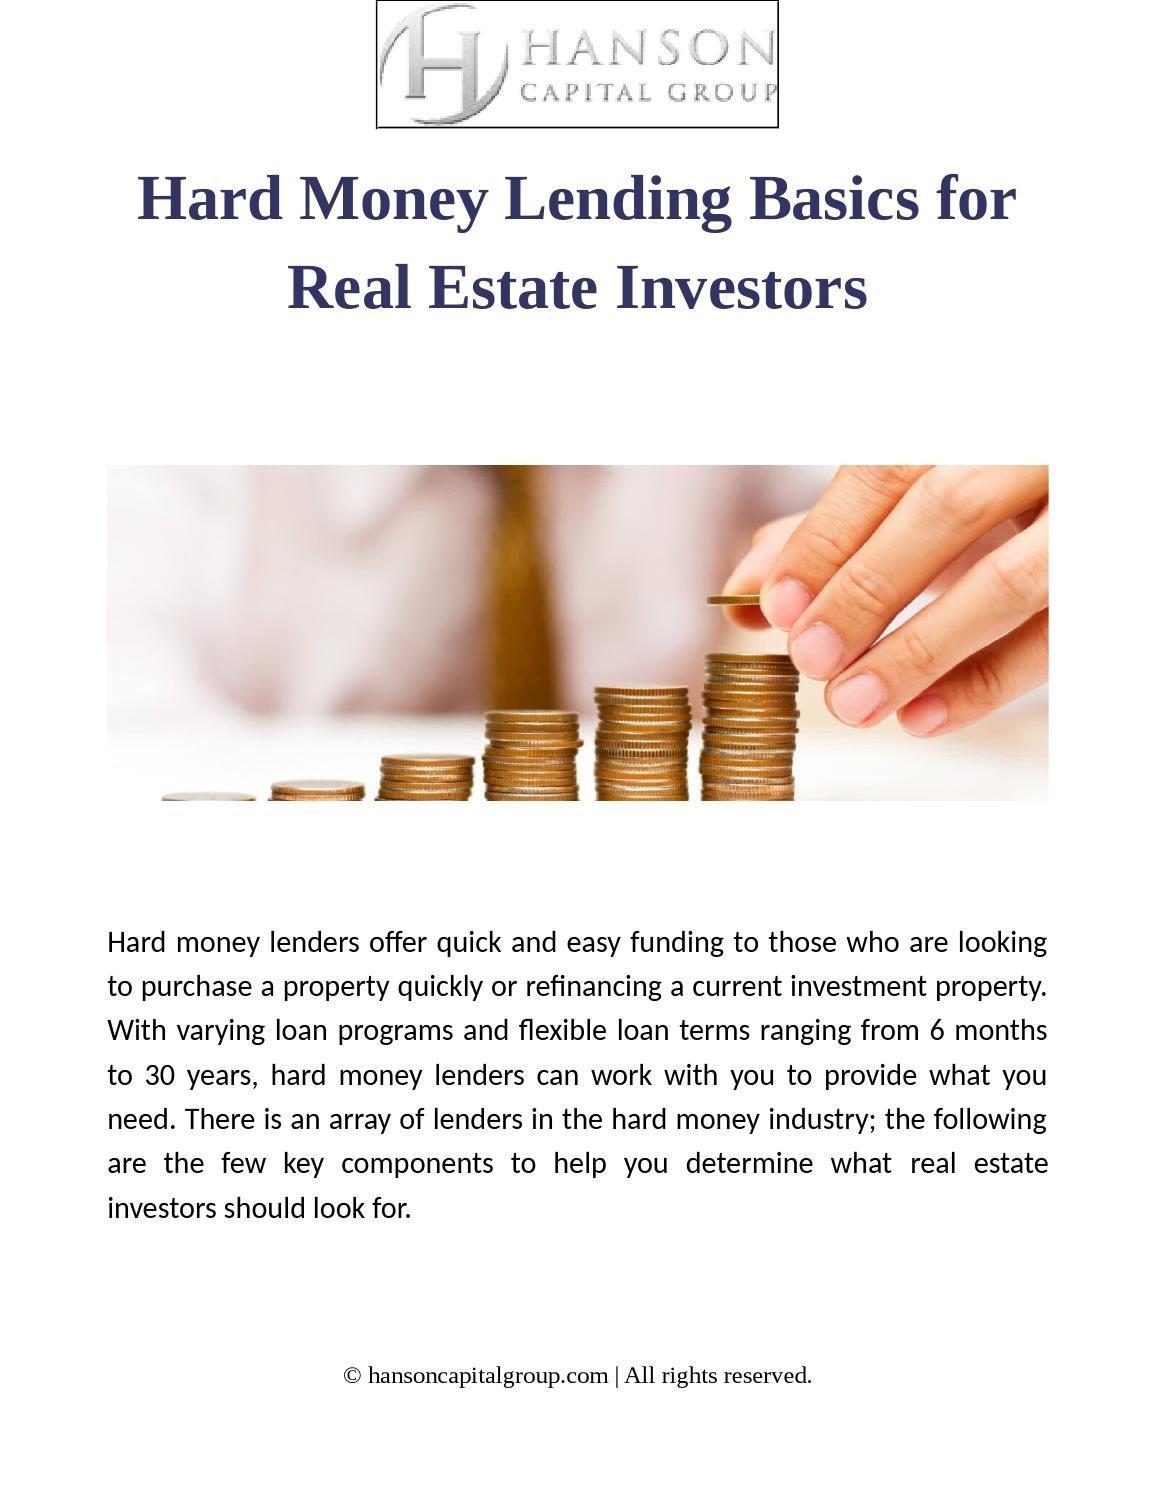 What is a hard money lender in real estate